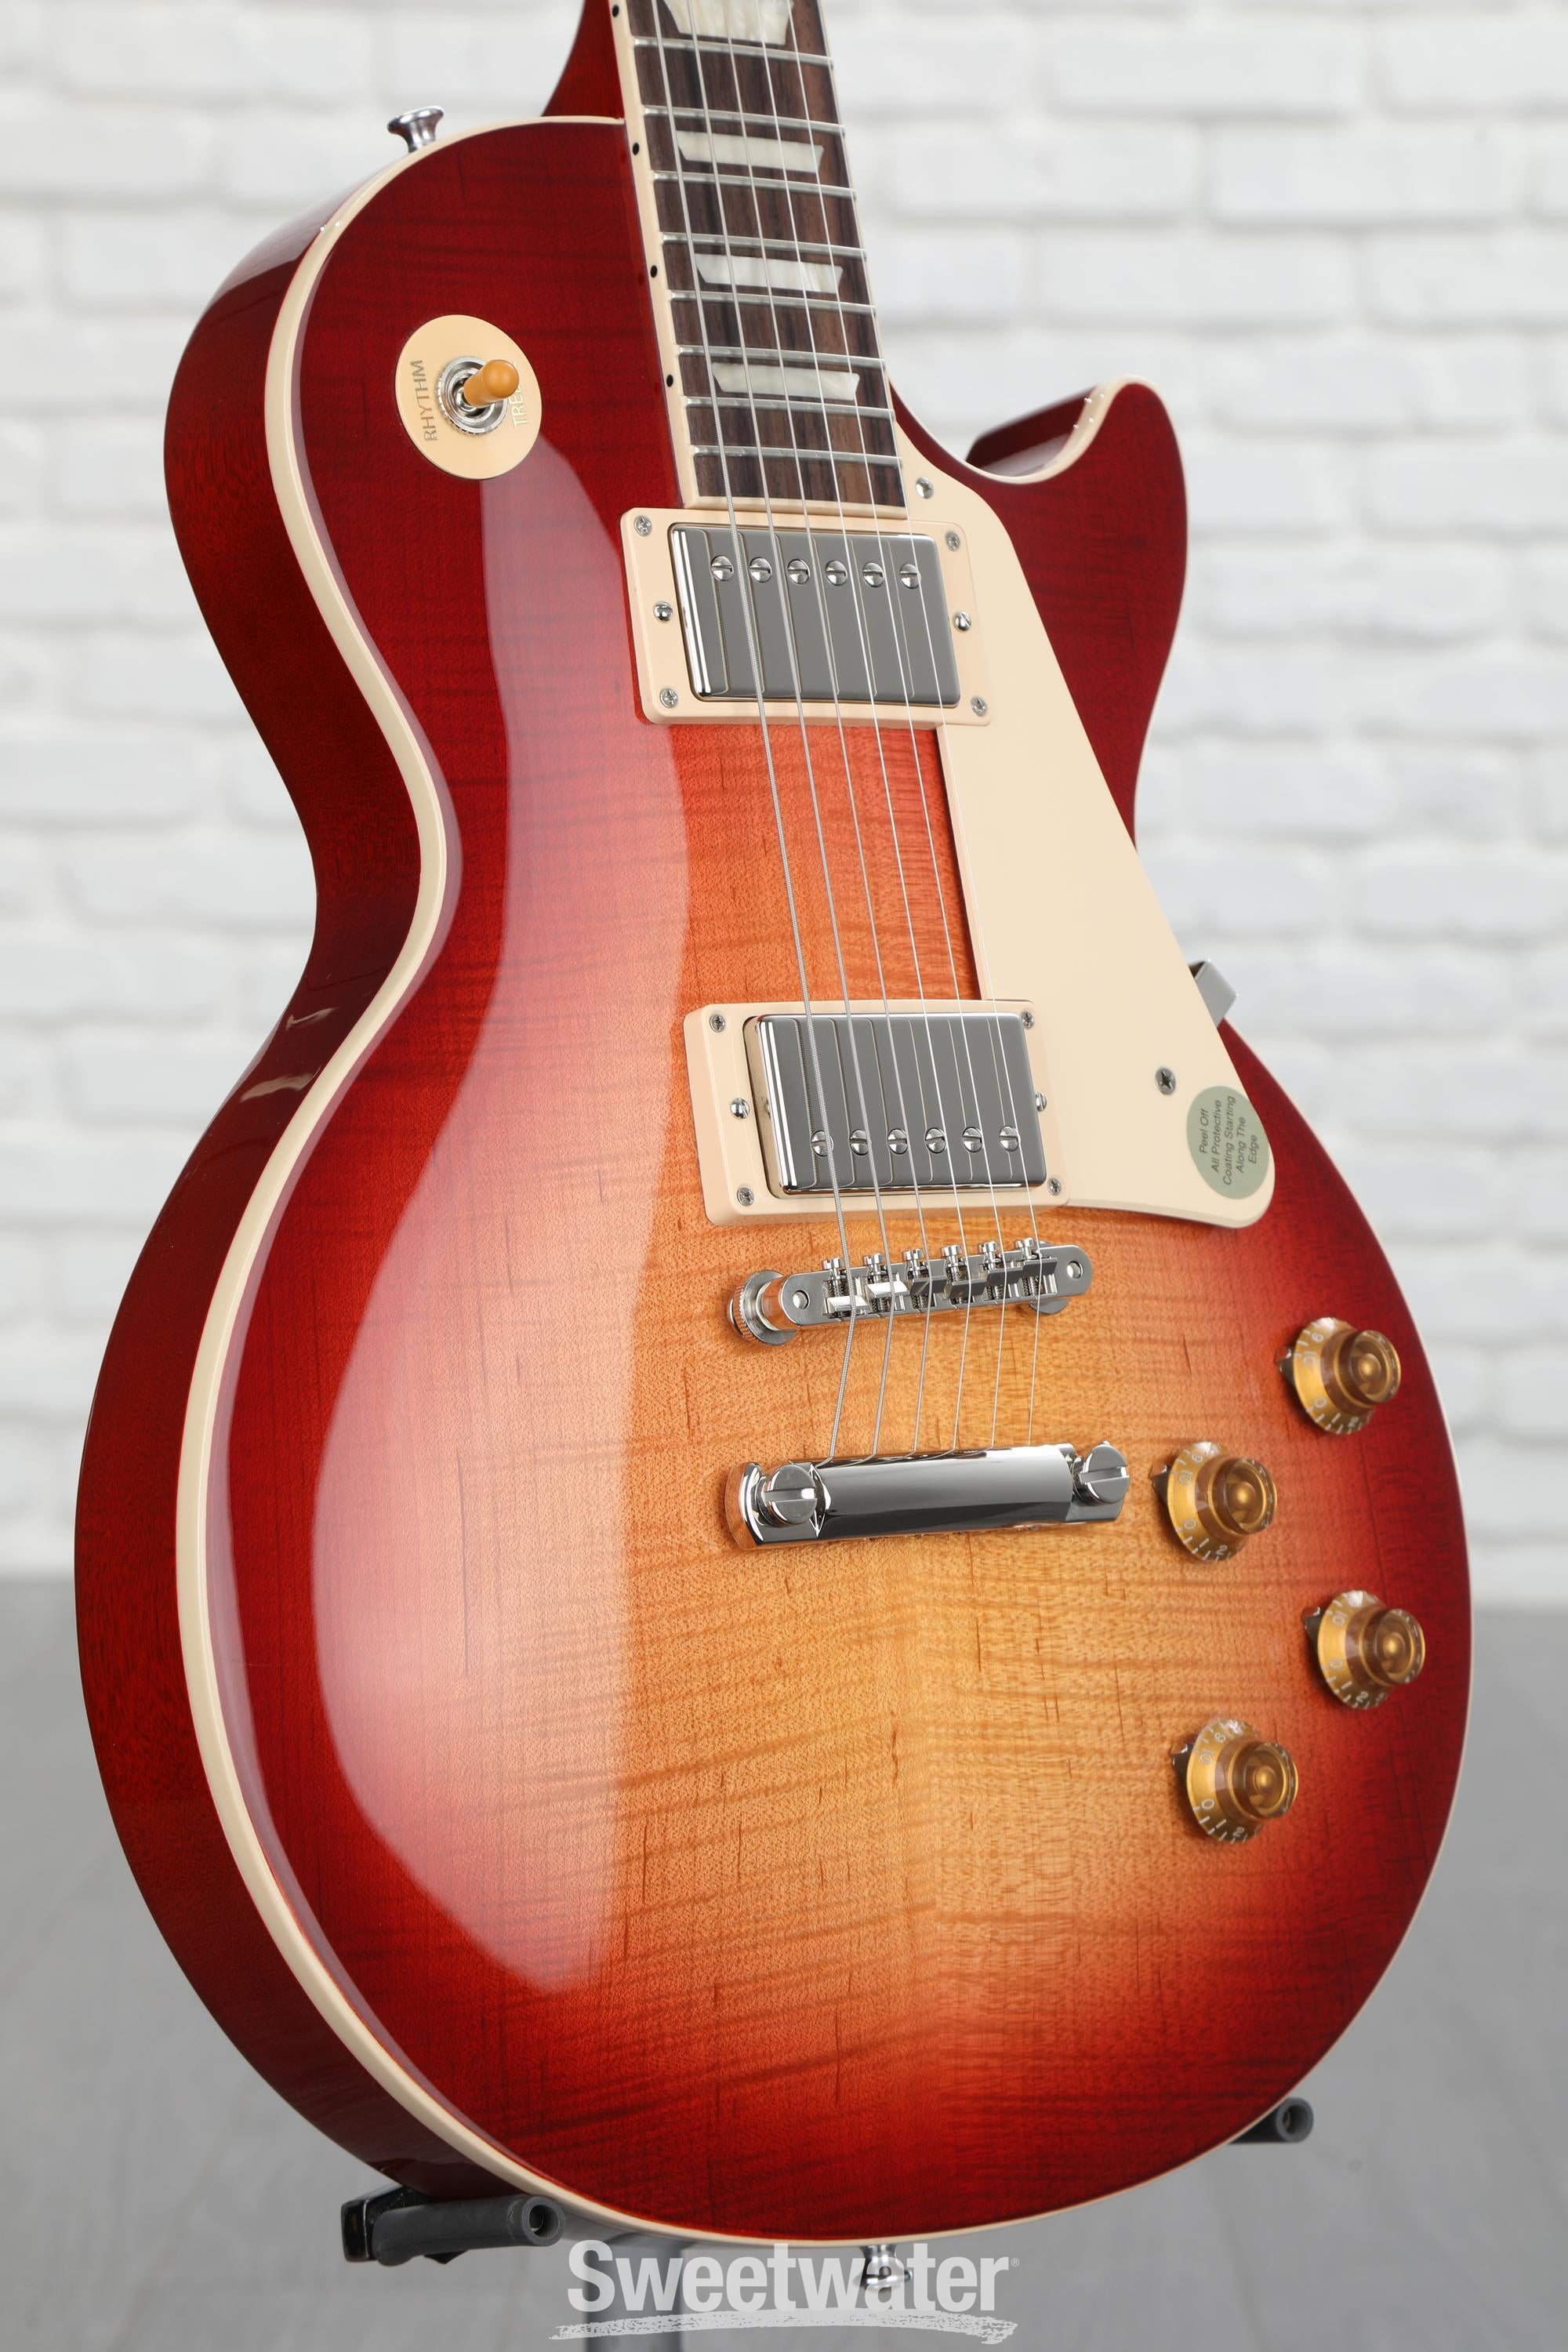 Gibson Les Paul Standard '50s AAA Top Electric Guitar - Heritage Cherry  Sunburst, Sweetwater Exclusive